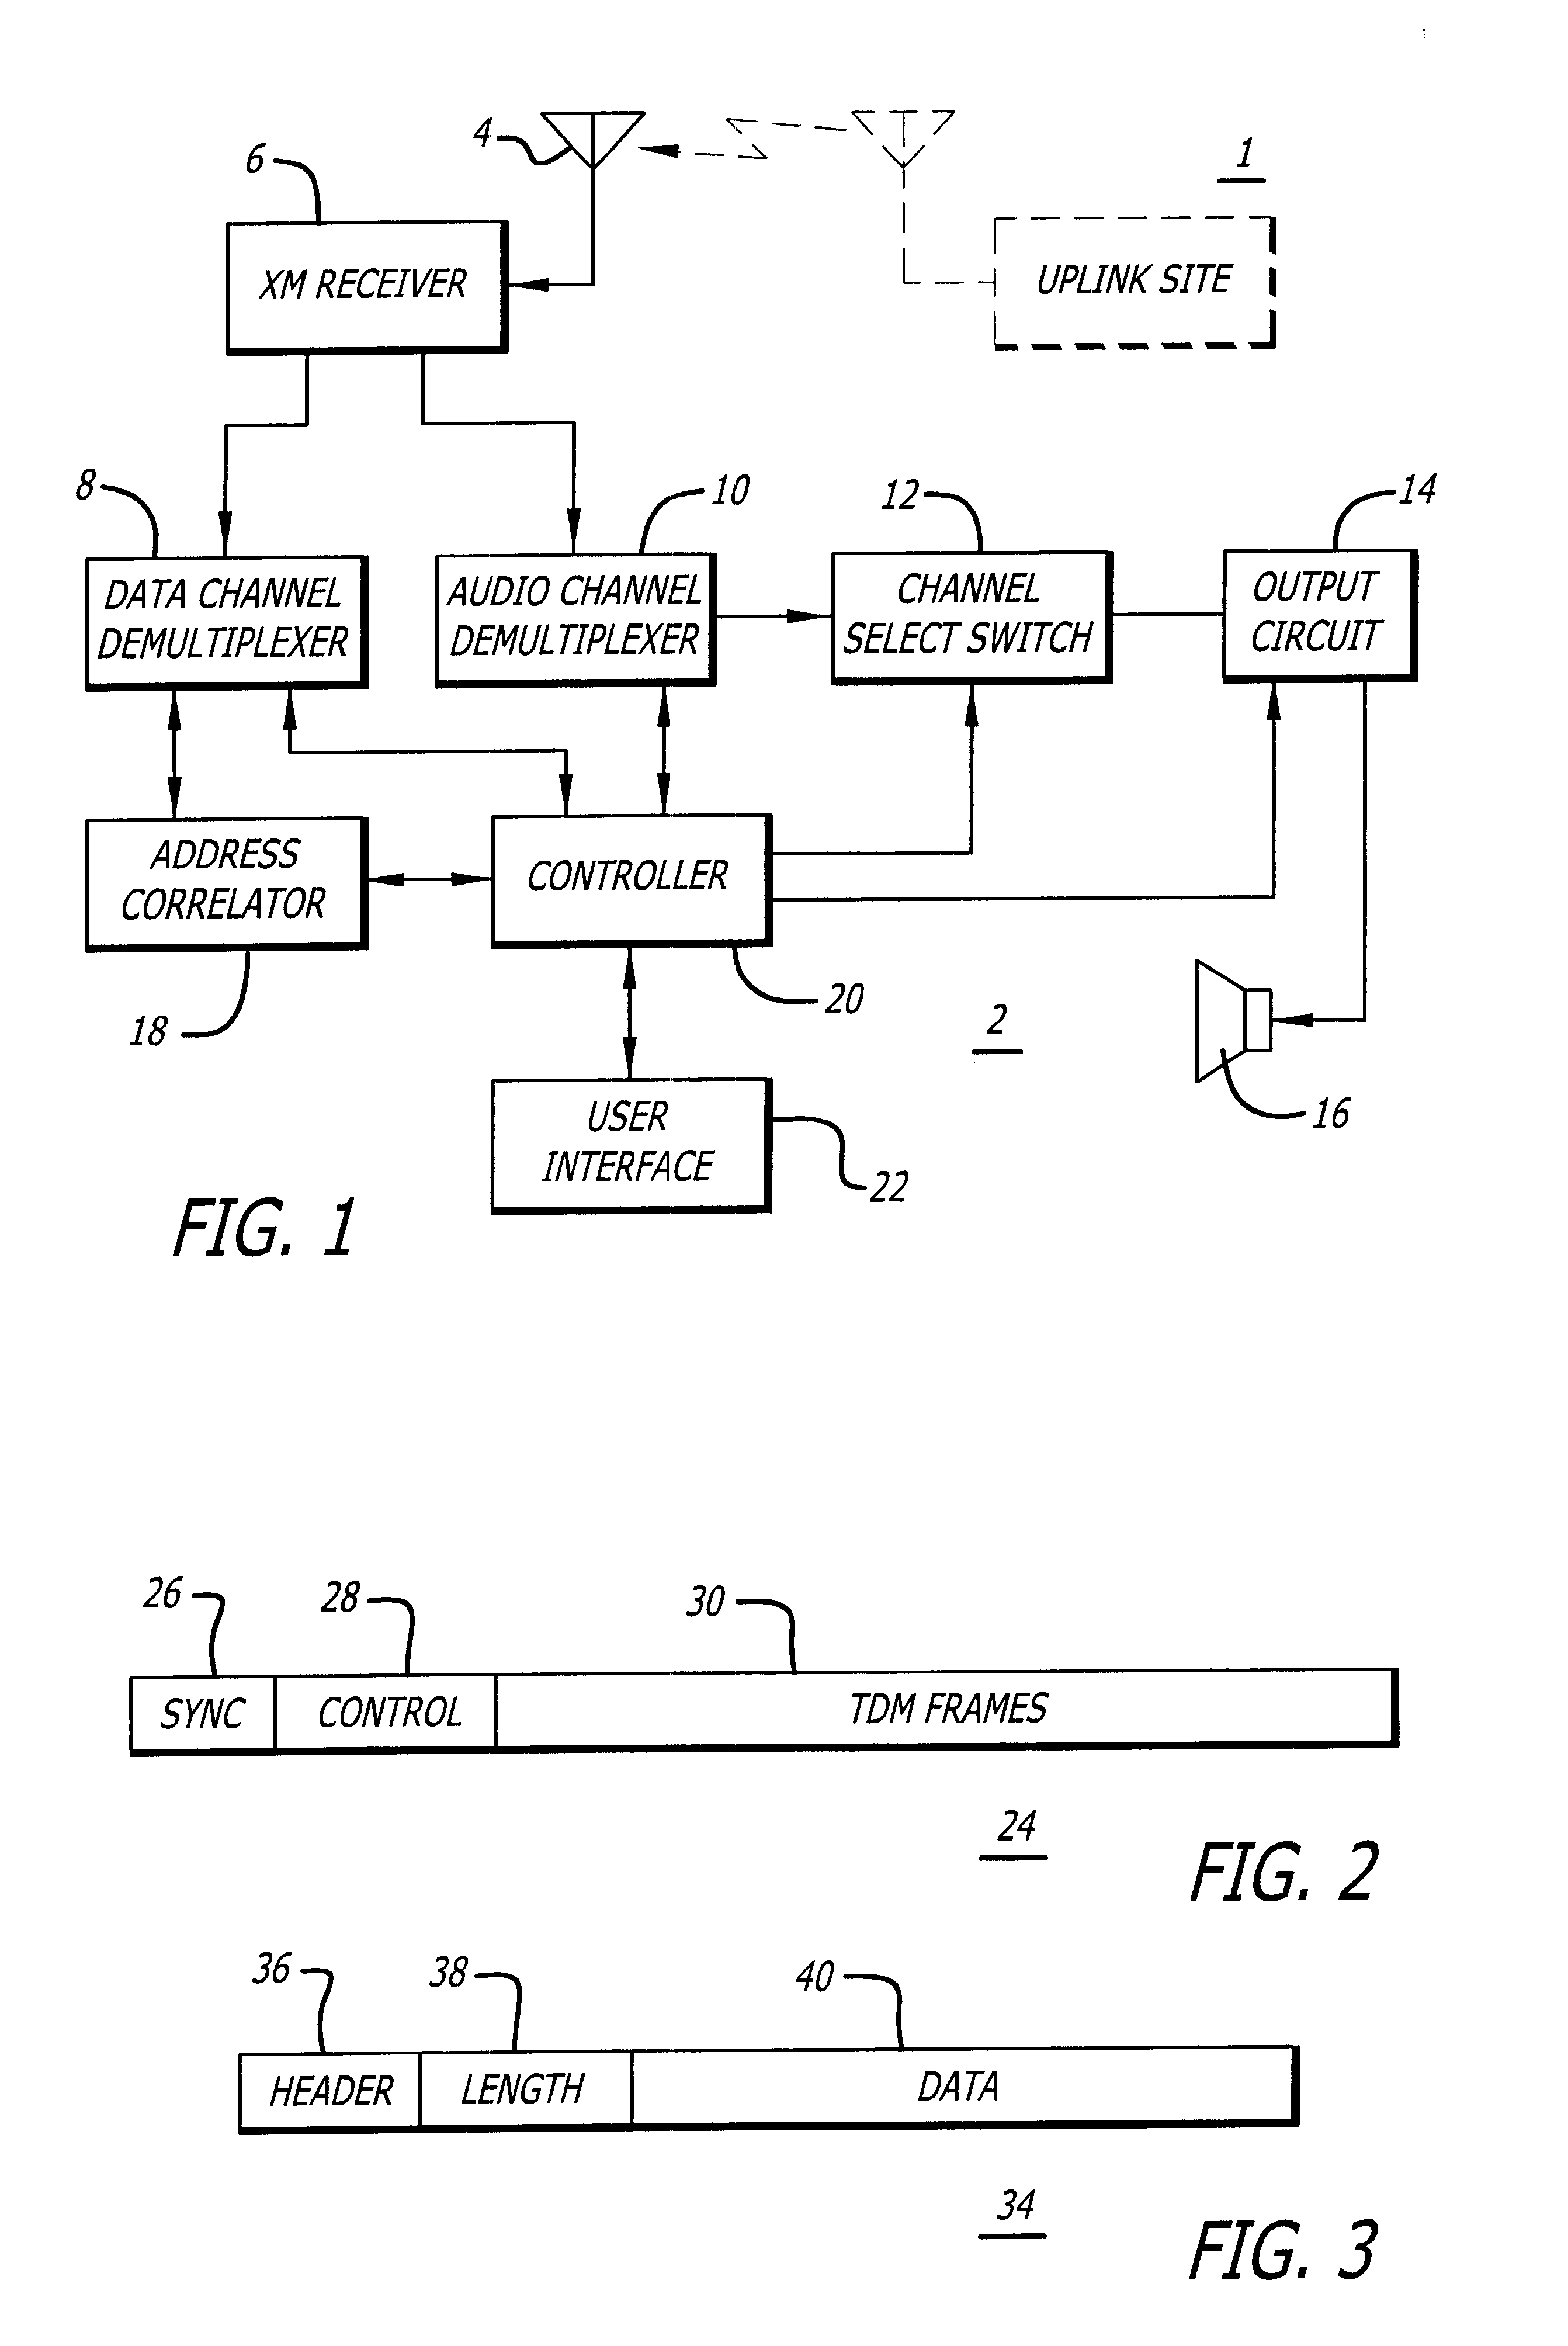 Method and apparatus for dispatch communications in a broadcast radio system